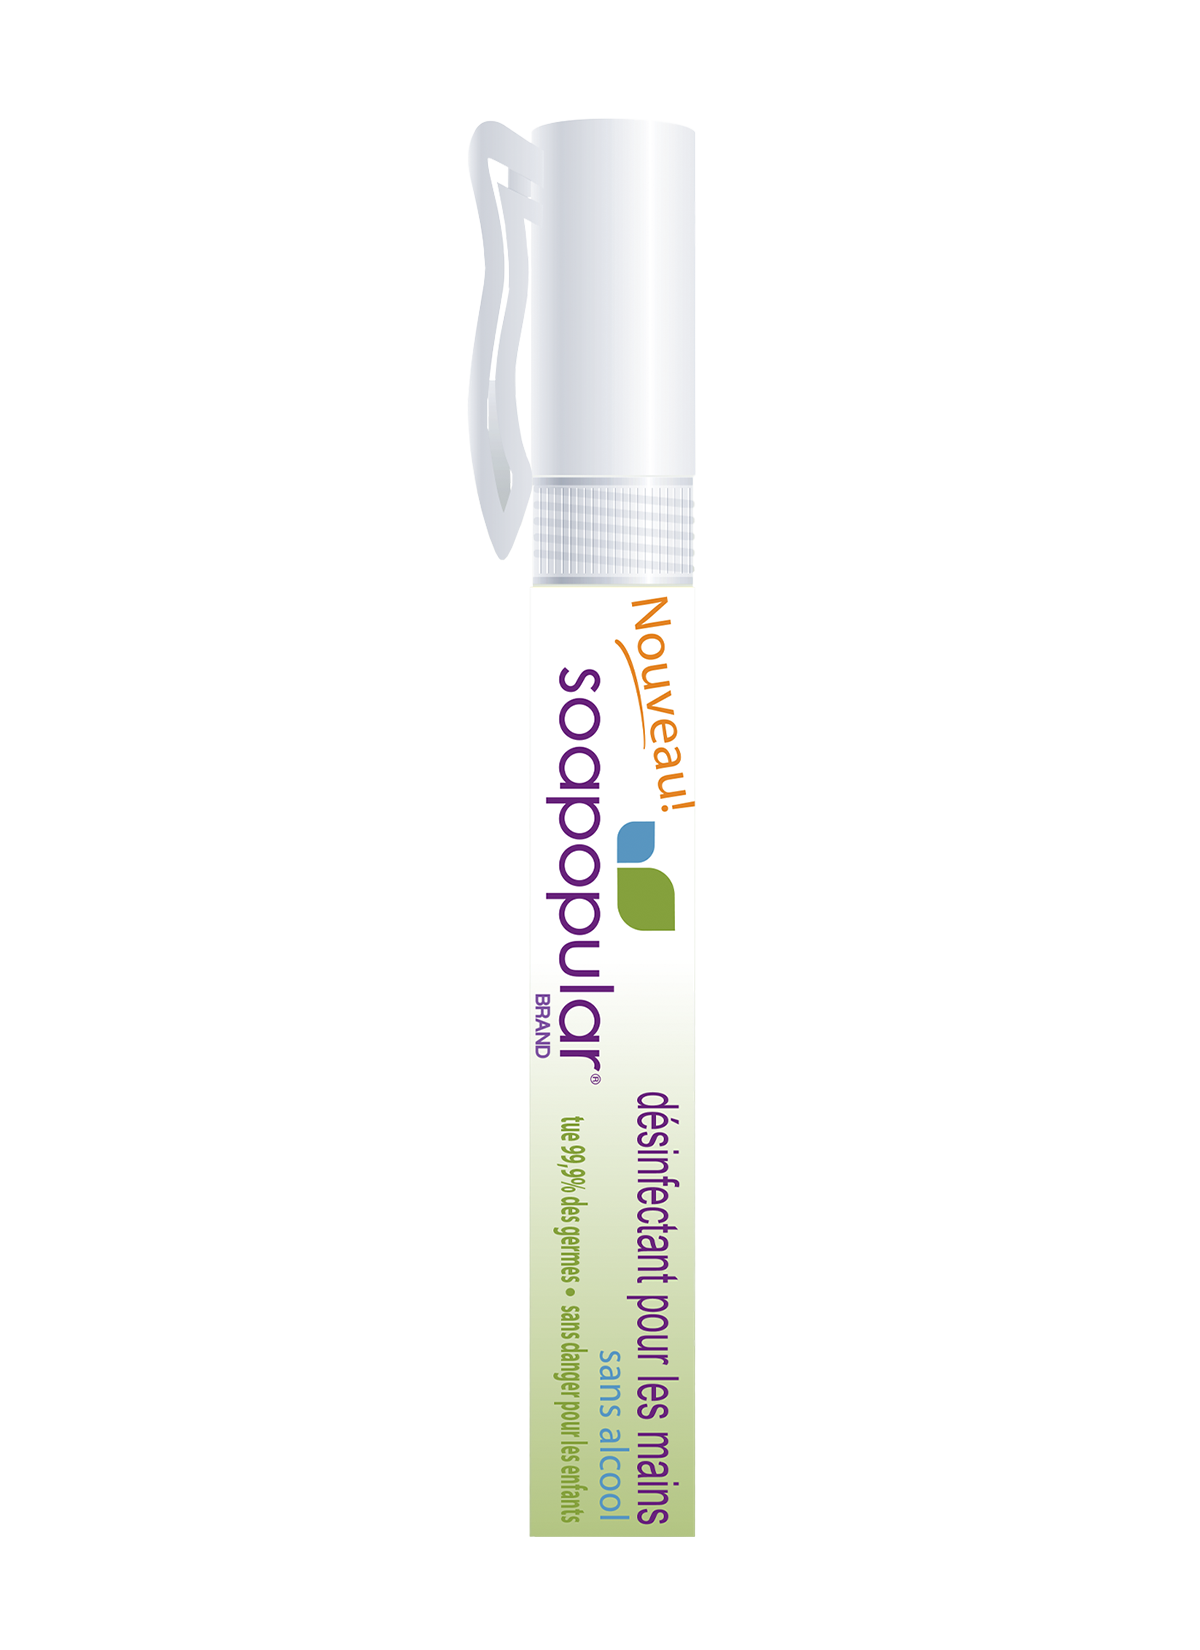 Soapopular alcohol free 10mL sanitizer pens are perfect for sponsors, events and other parties.